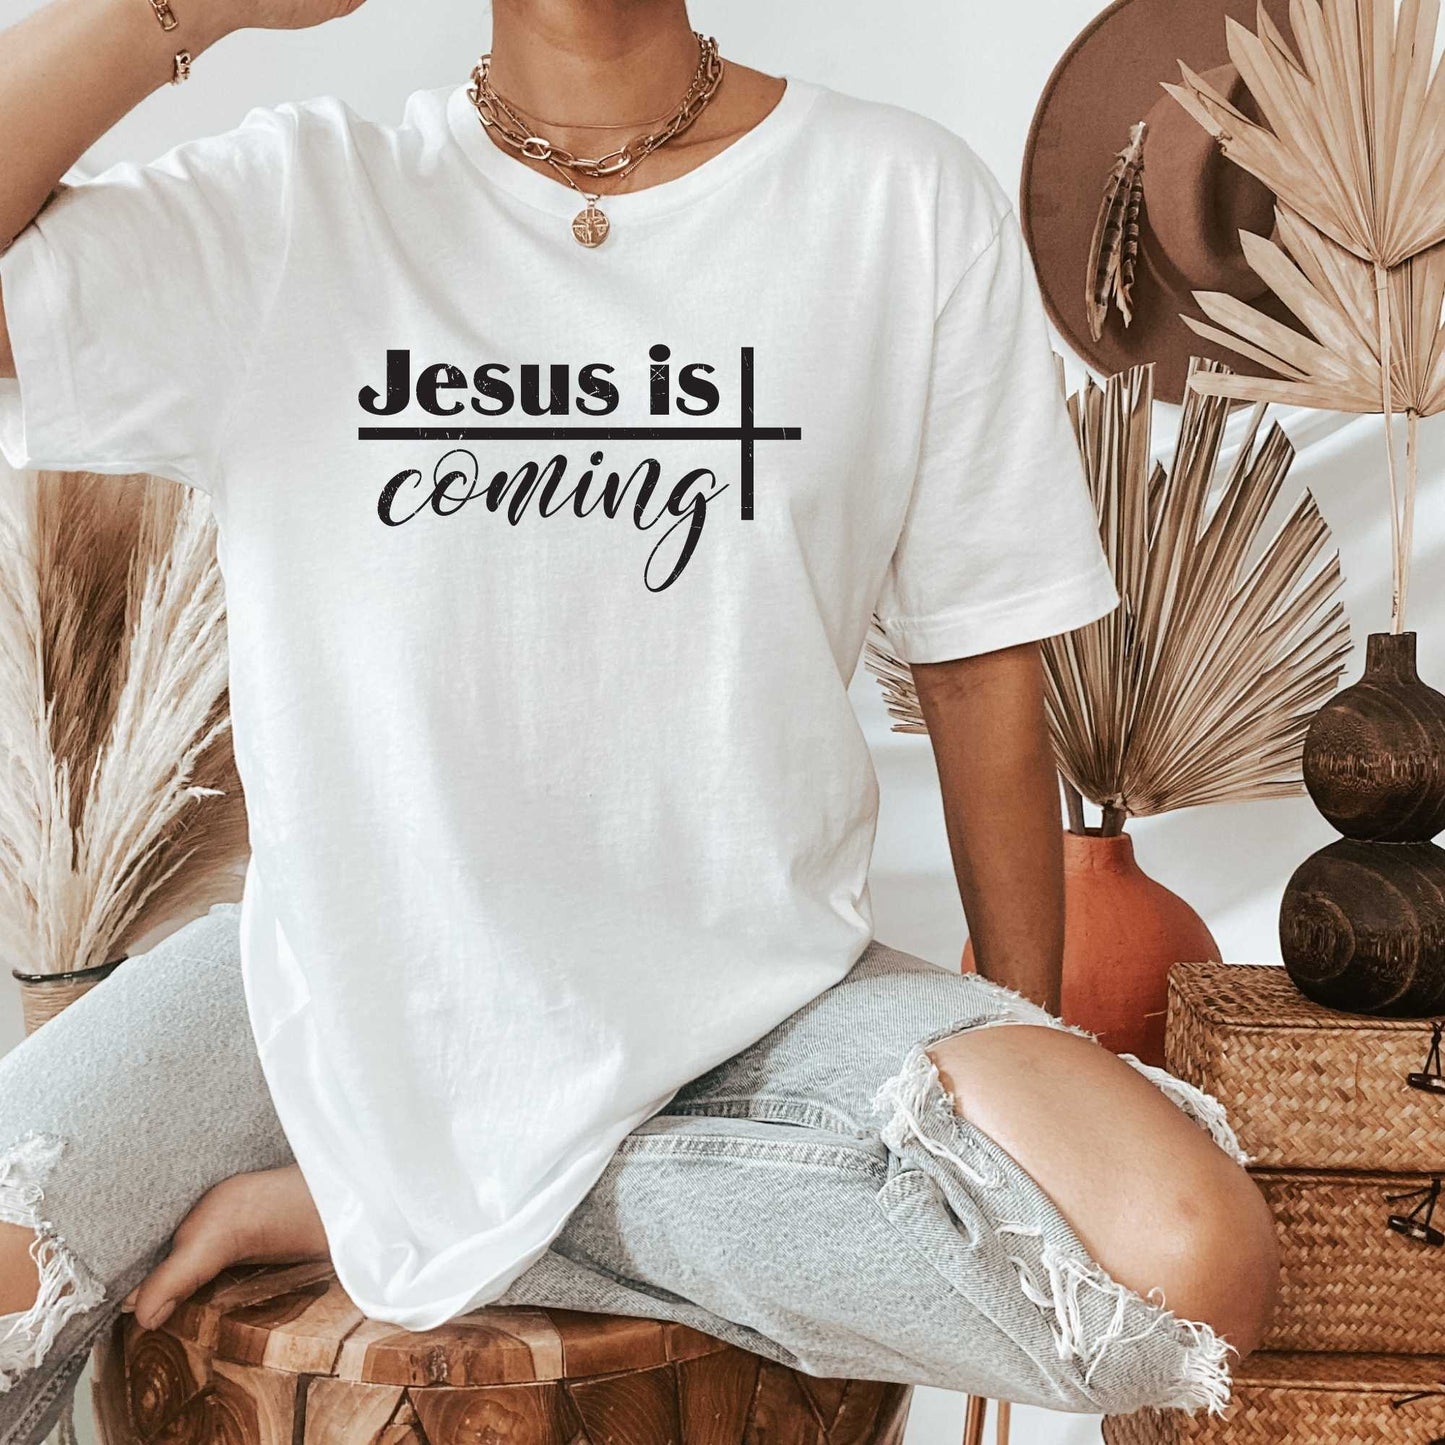 Jesus is Coming, Shirts about God for Men and Women